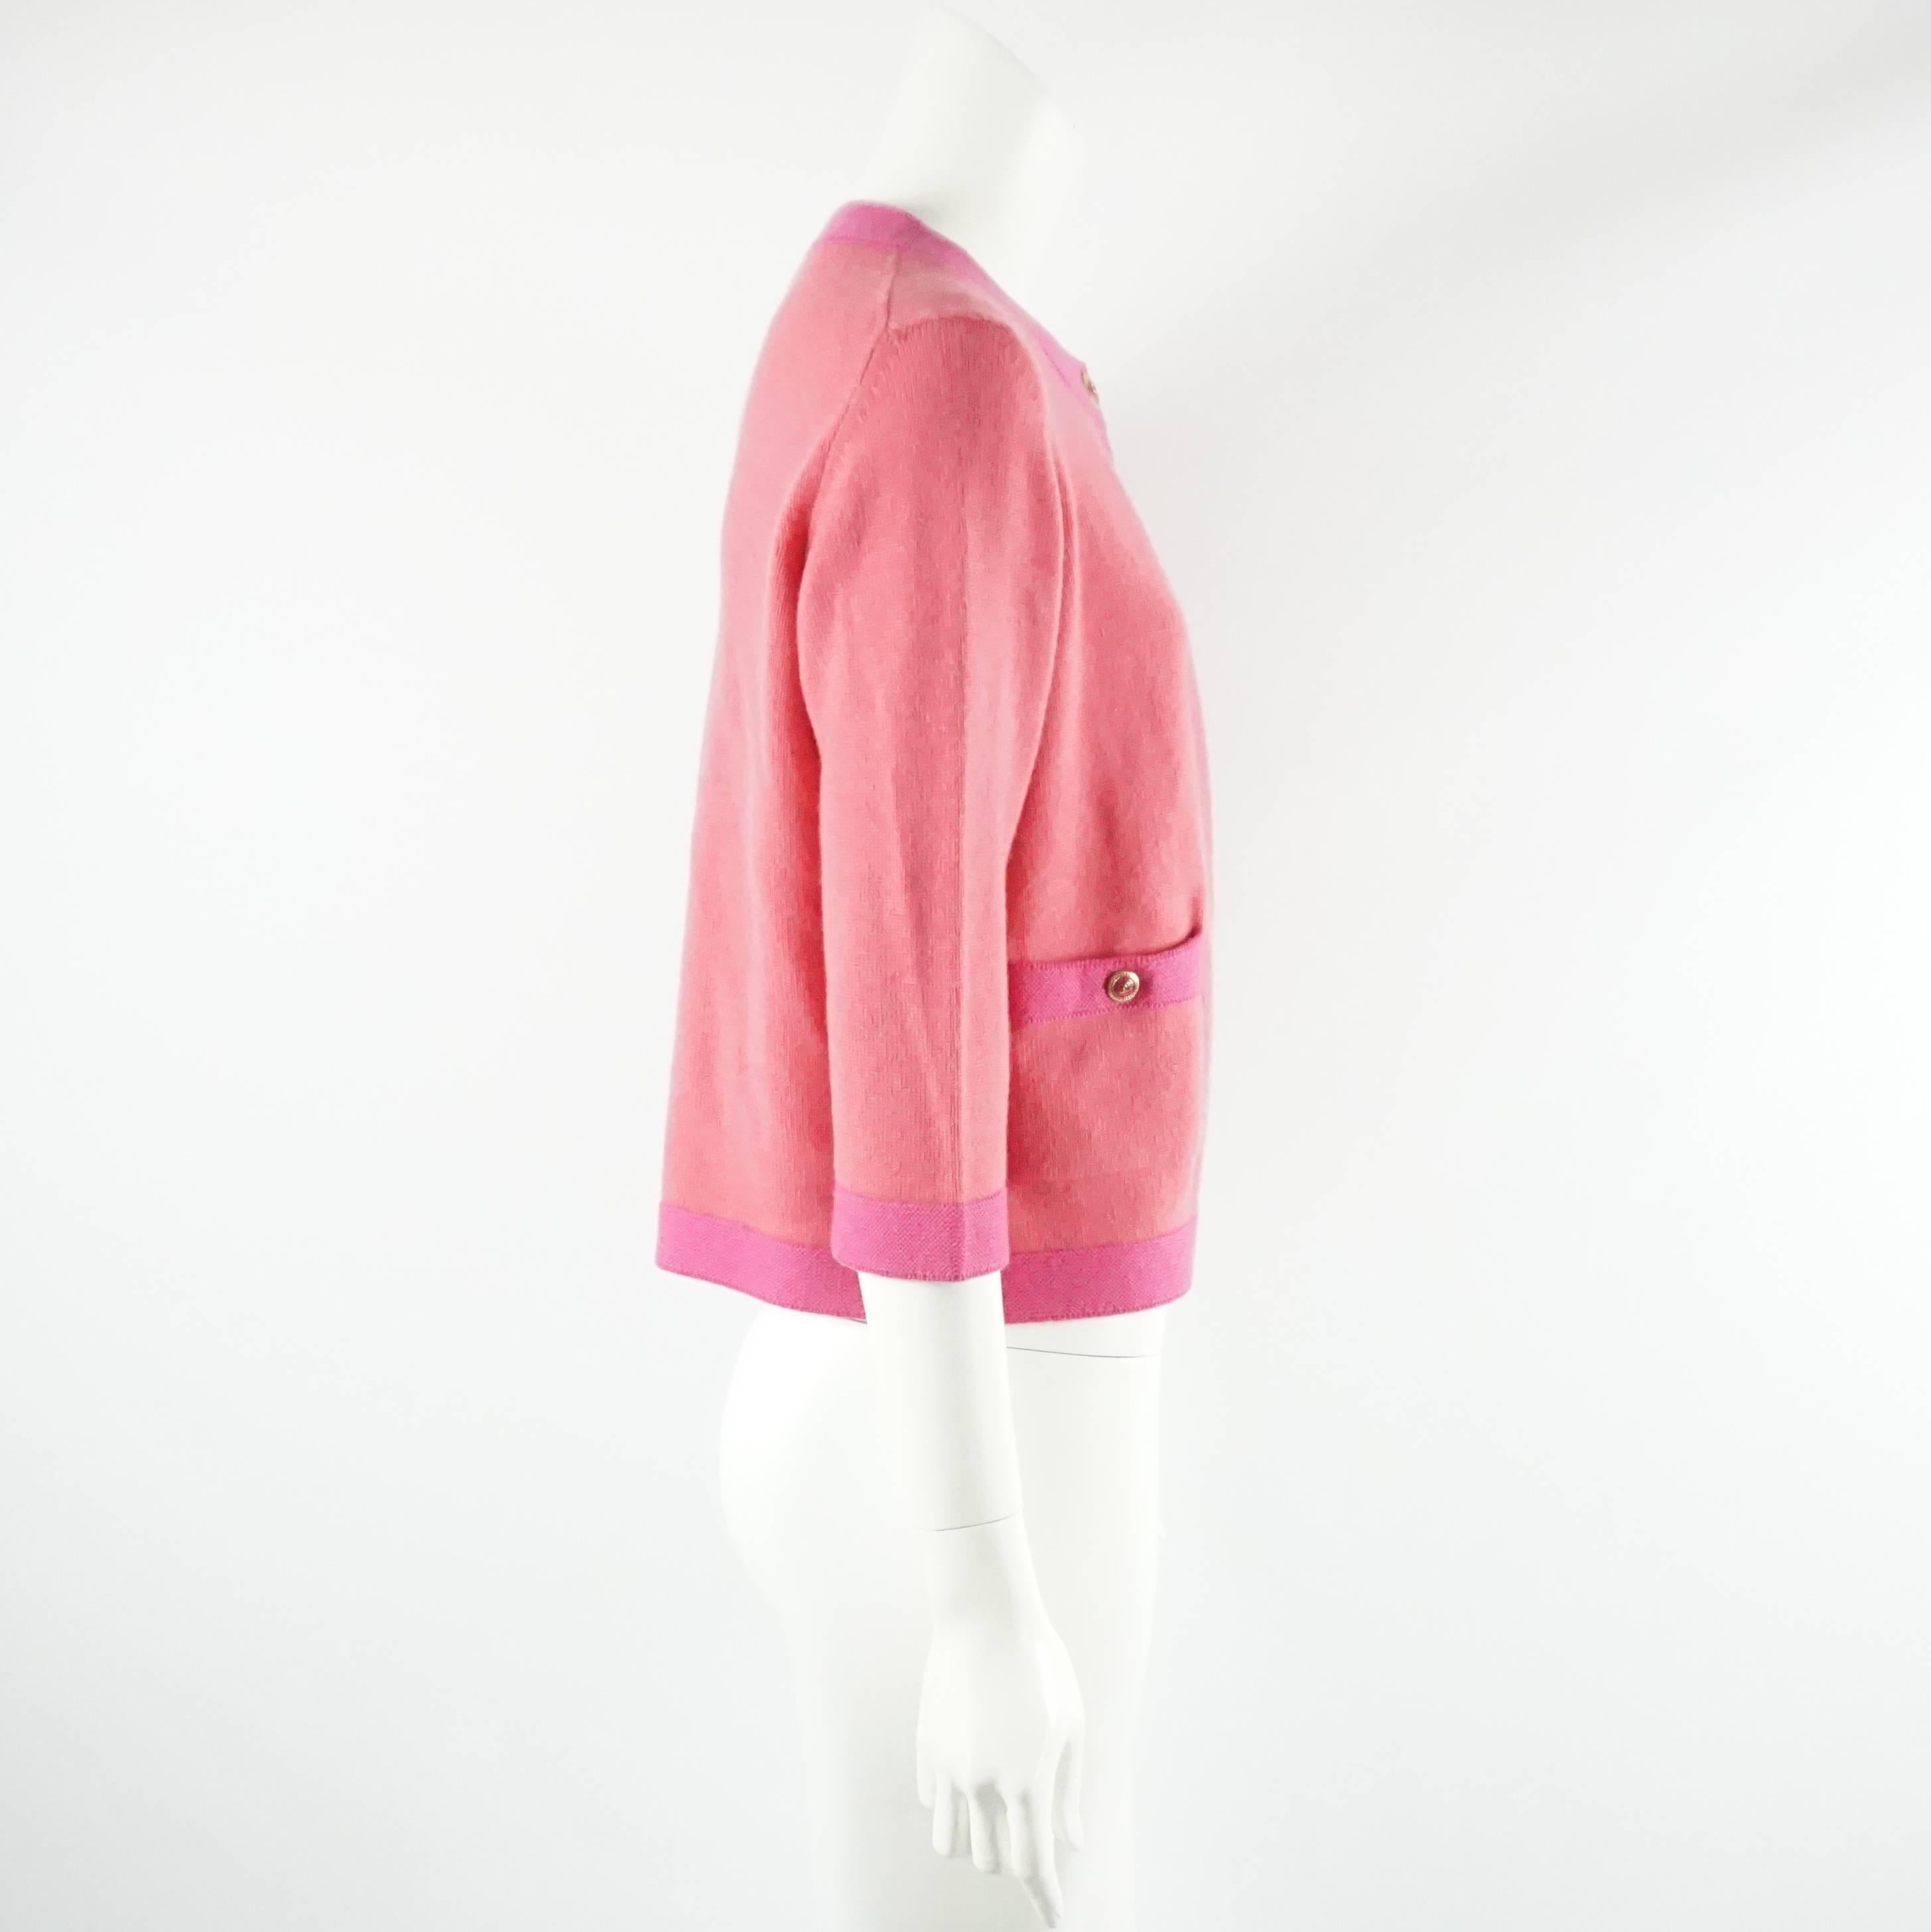 This Chanel cashmere sweater is salmon colored with a pink trim and is from the 2007P collection. There are 2 pockets on the front of the cardigan with  gold and pink Chanel logo buttons and a single top button for closure. This sweater is in